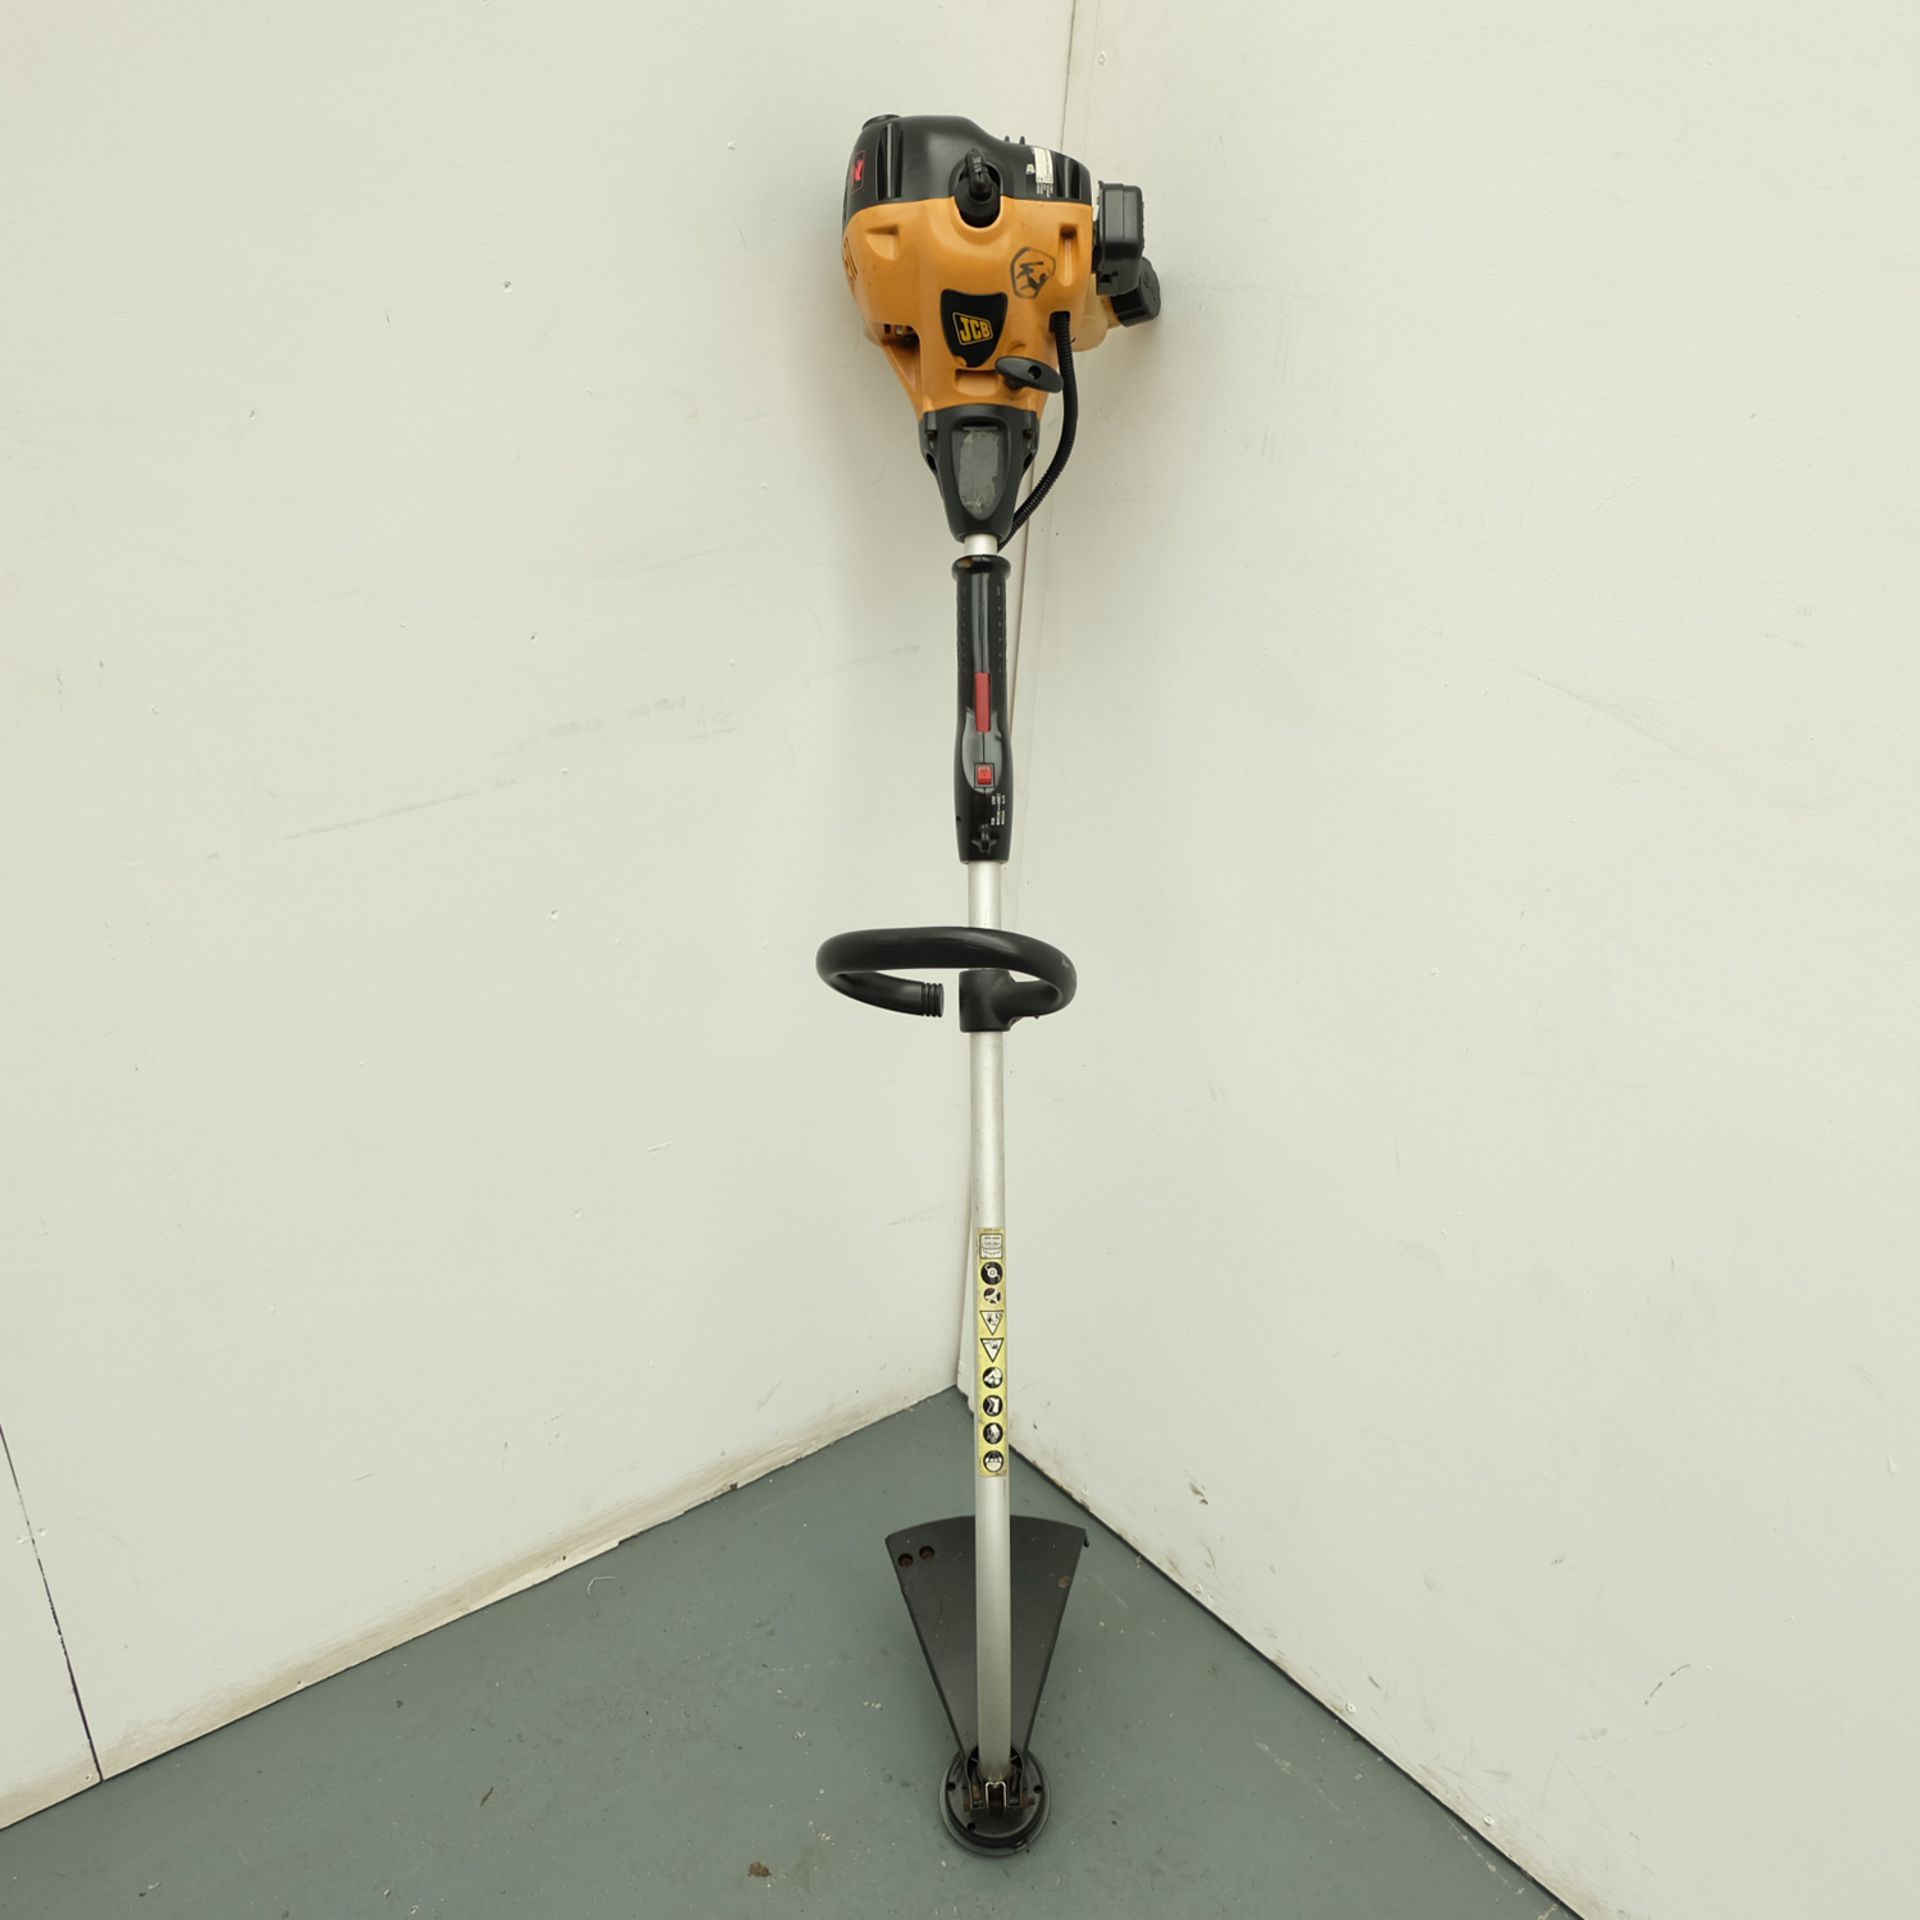 JCB Petrol Powered Strimmer. Rated No Load Speed 11000/Min.